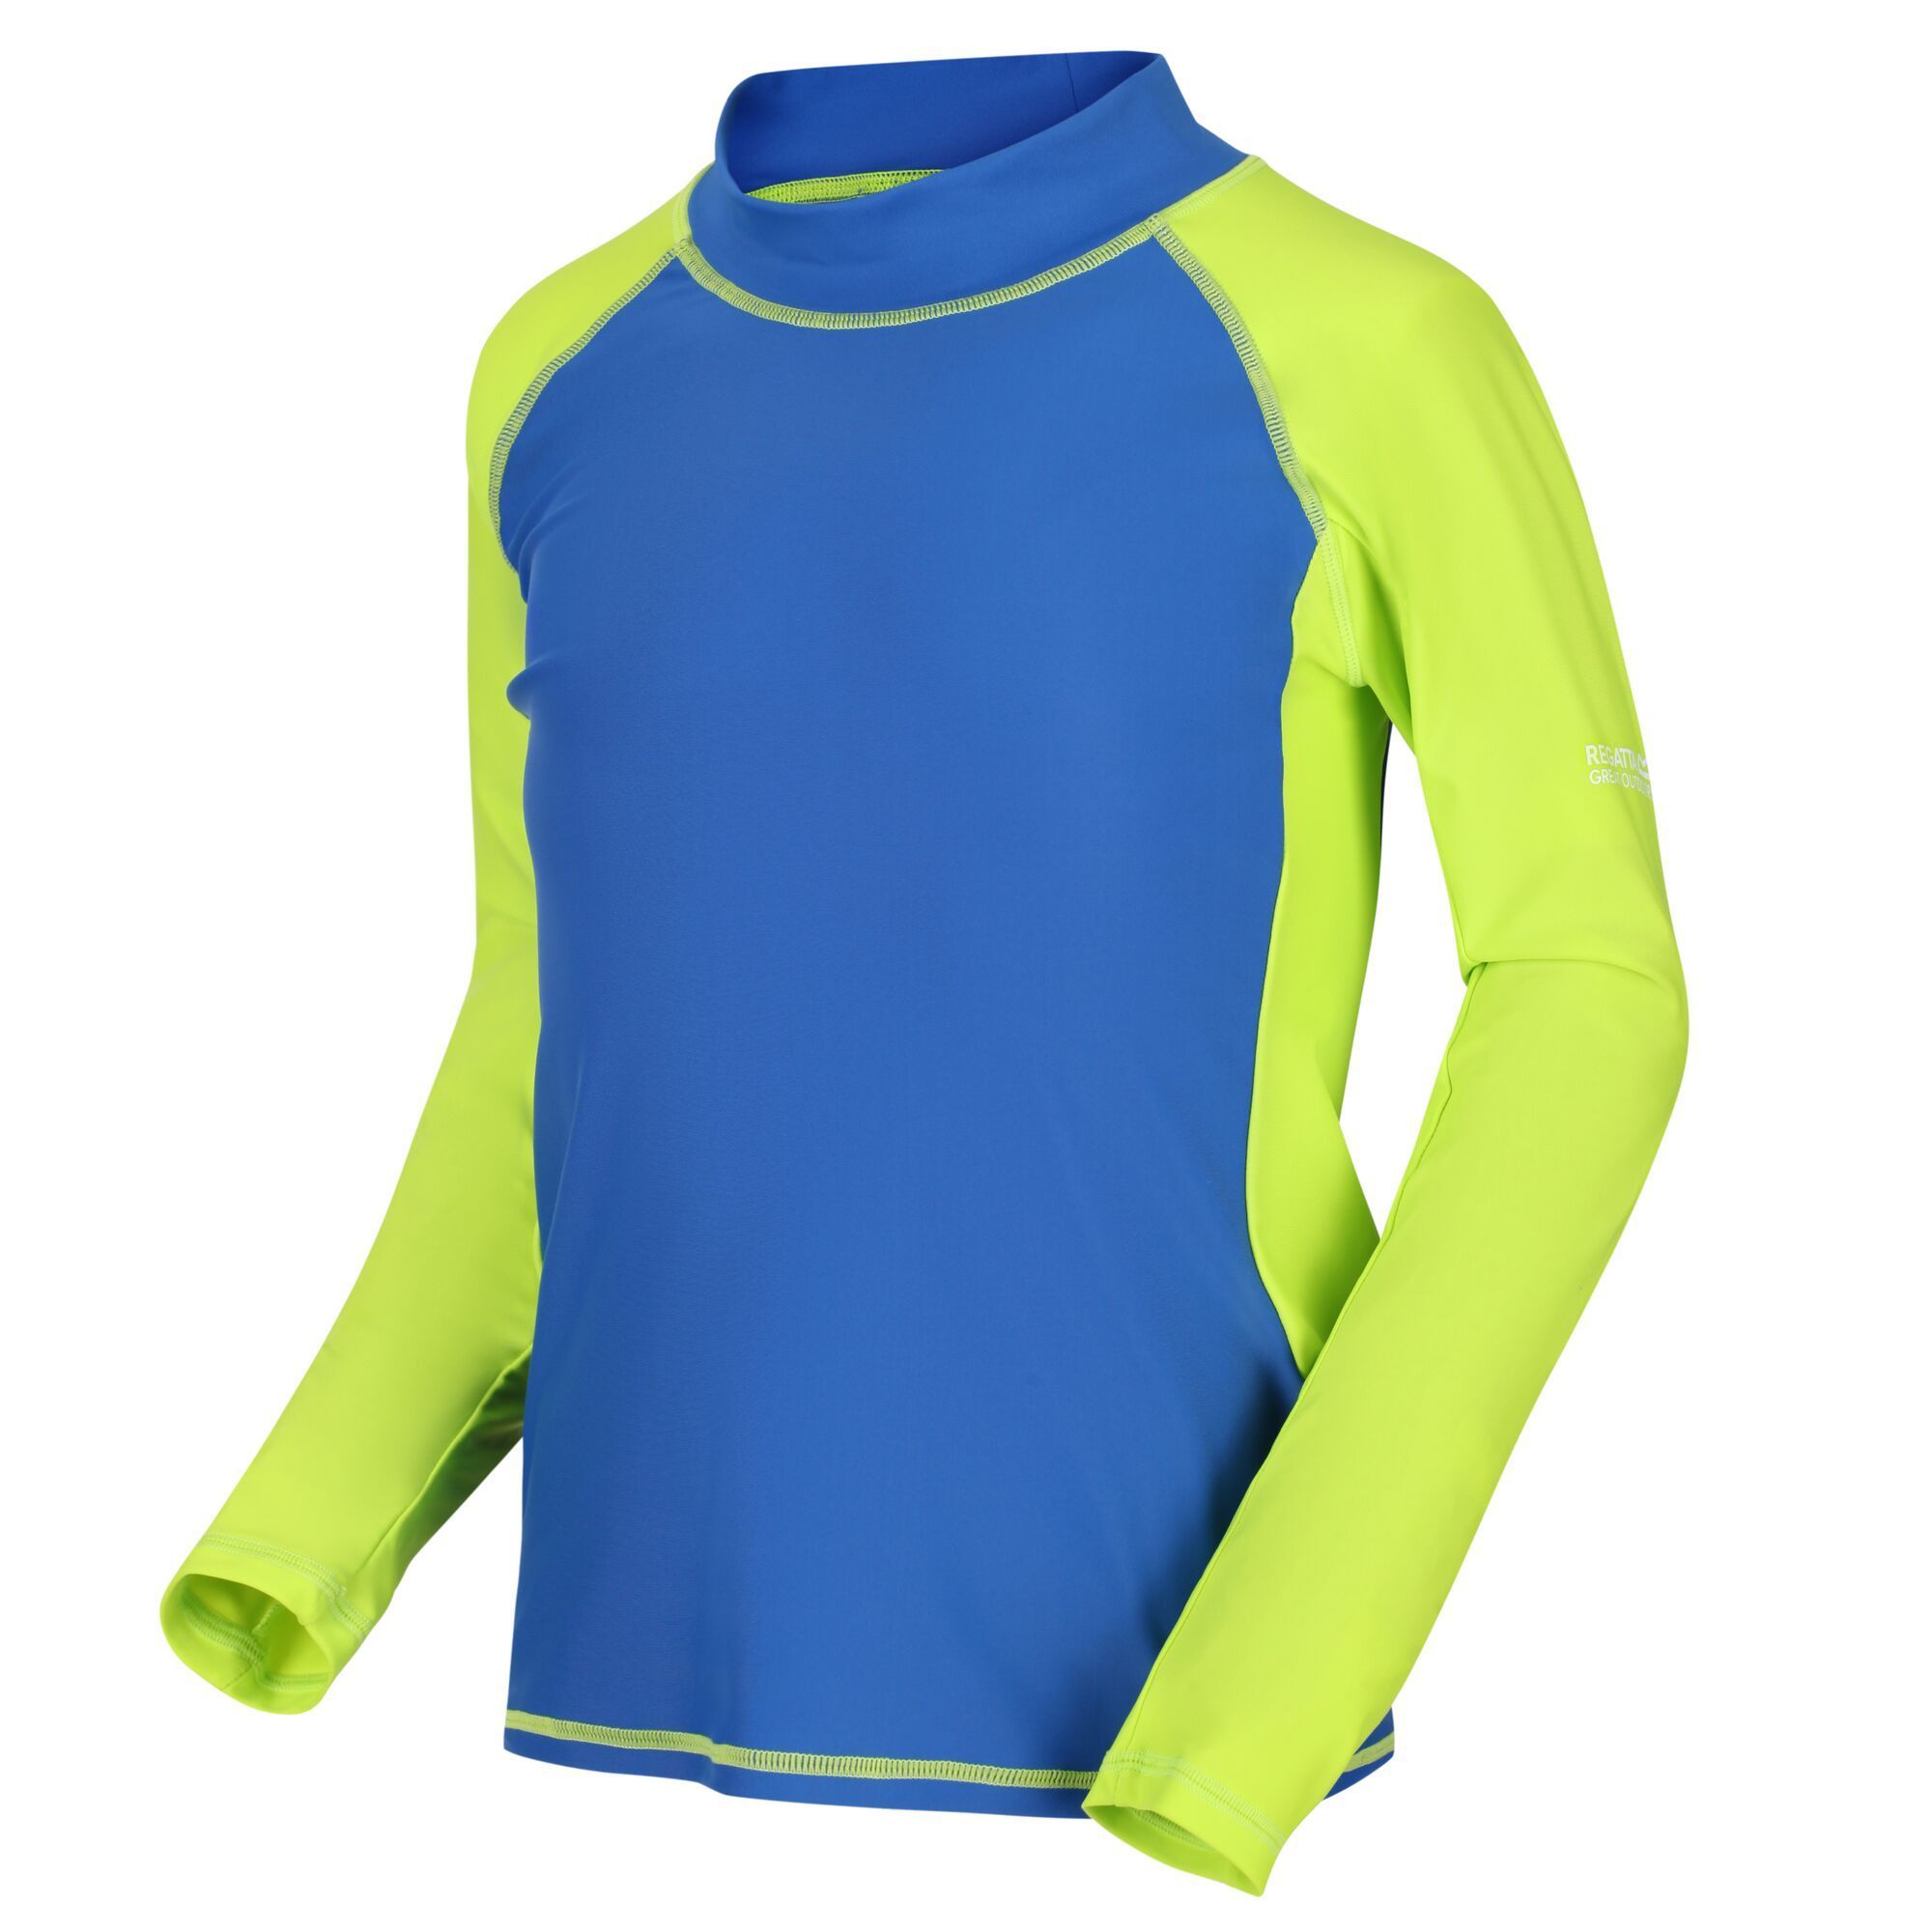 Material: 82% Polyamide, 18% Elastane. Soft touch and lightweight long sleeve swim top. UV protection (UPF) built in.